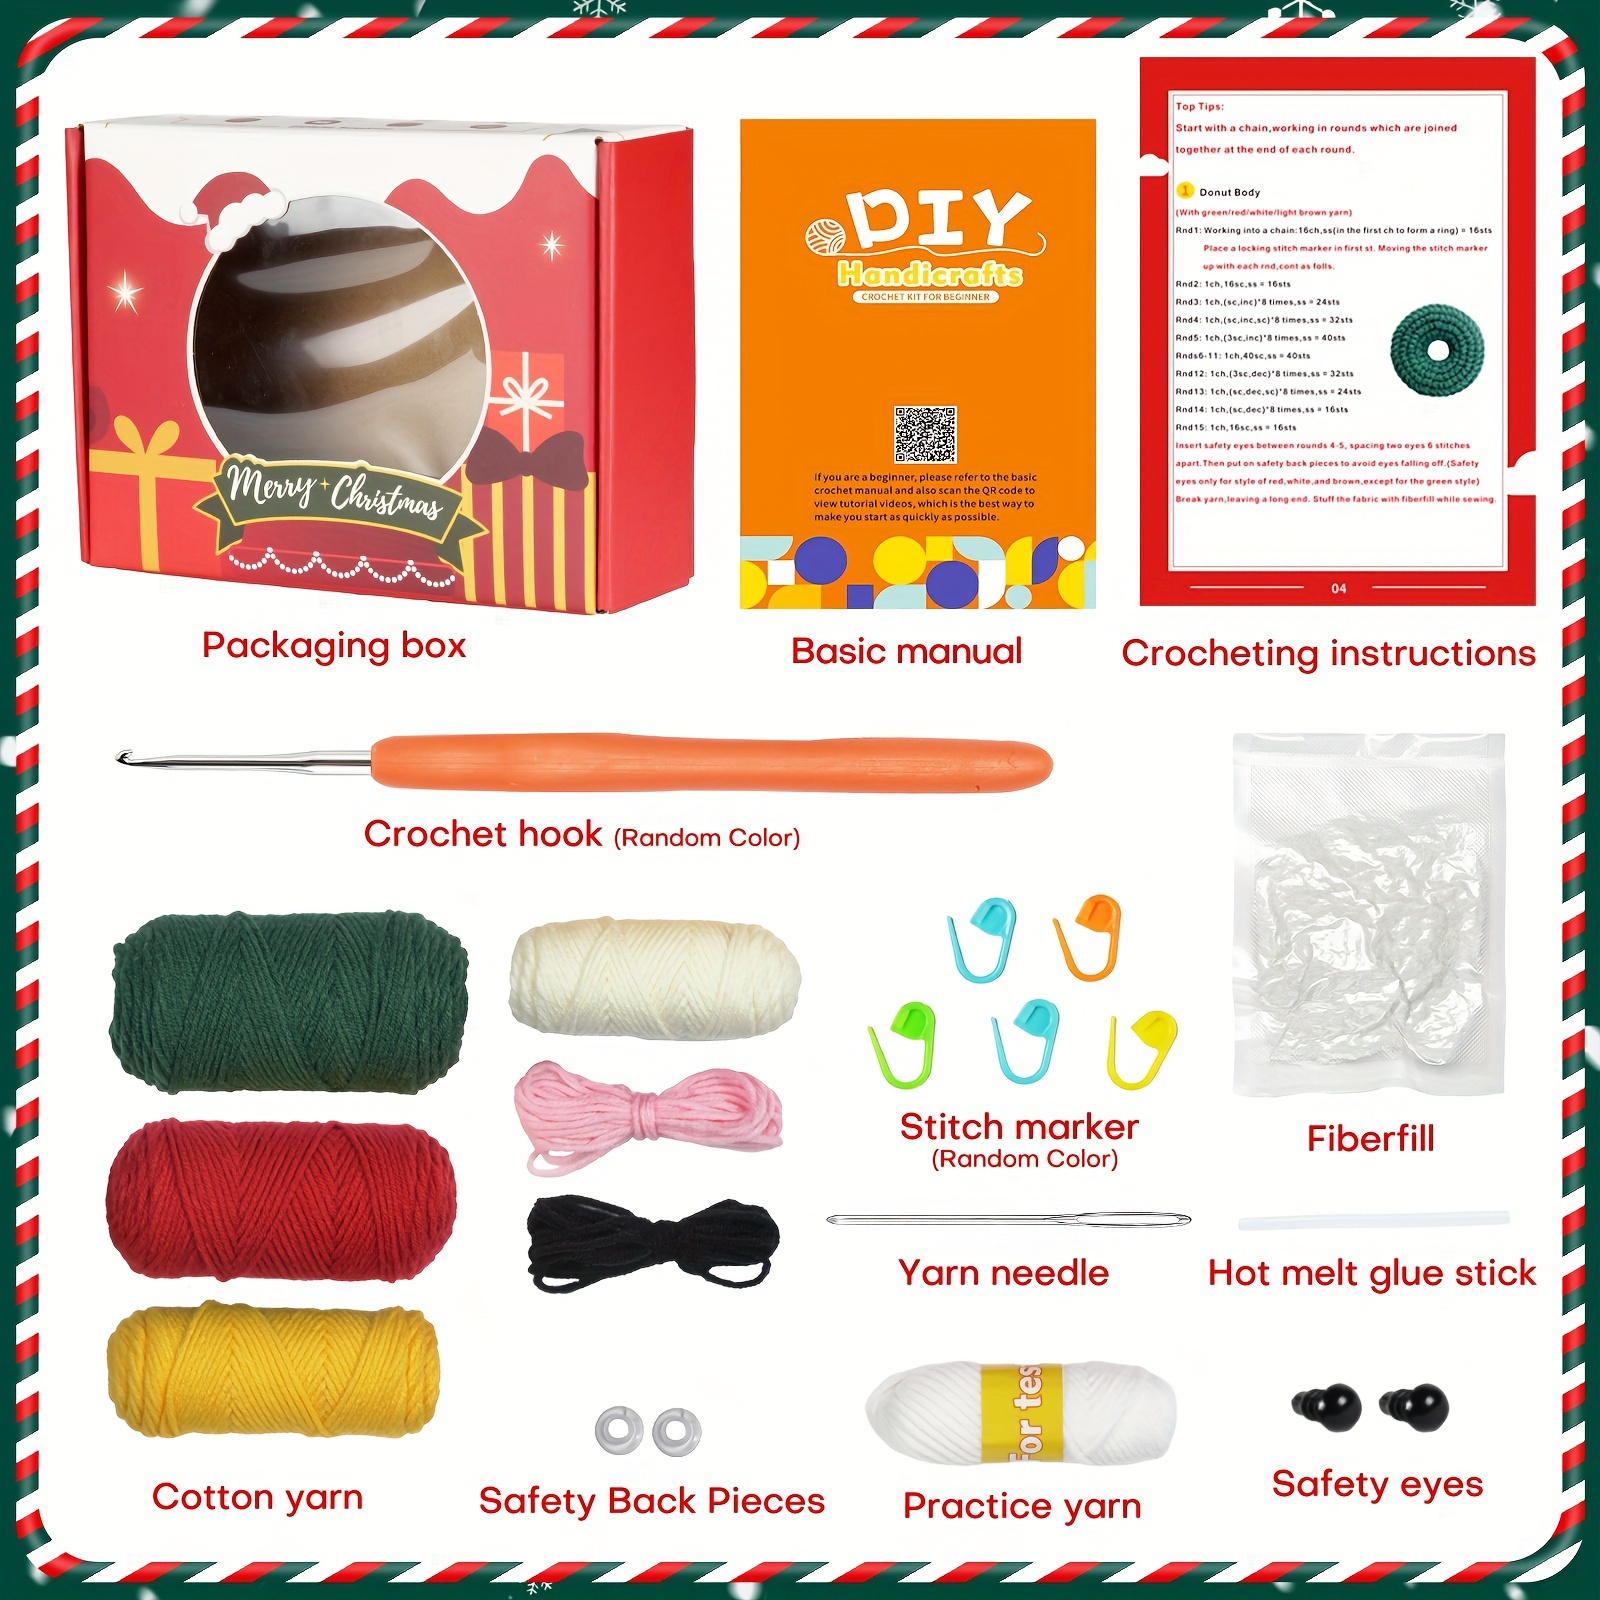 The Best Crochet Kits for Kids - That Kids' Craft Site